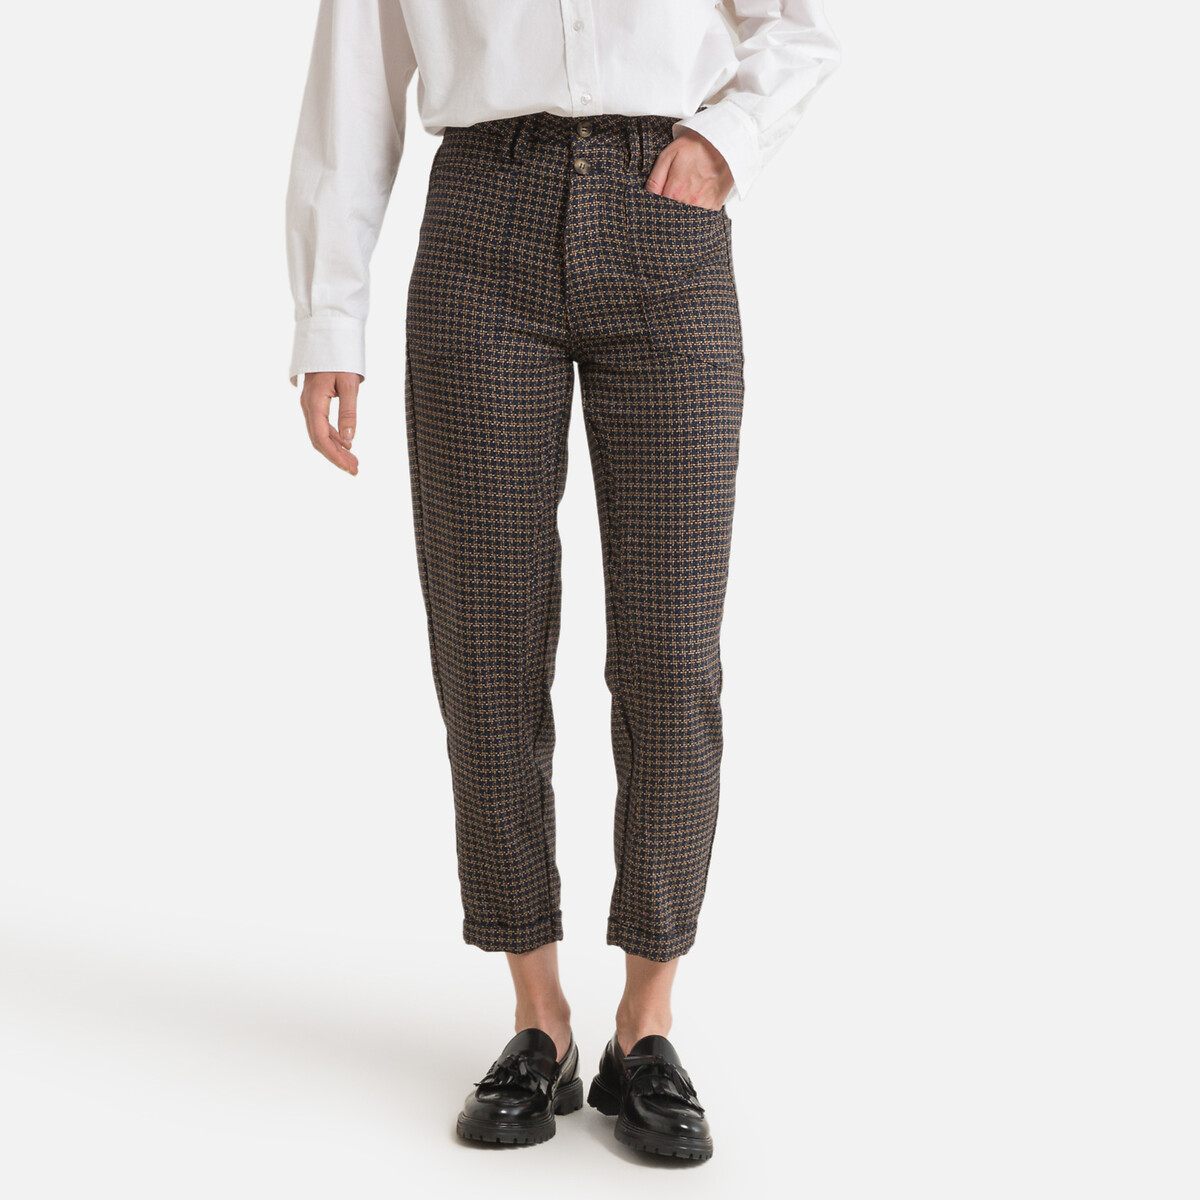 Gingham Print Straight Trousers, Length 27"